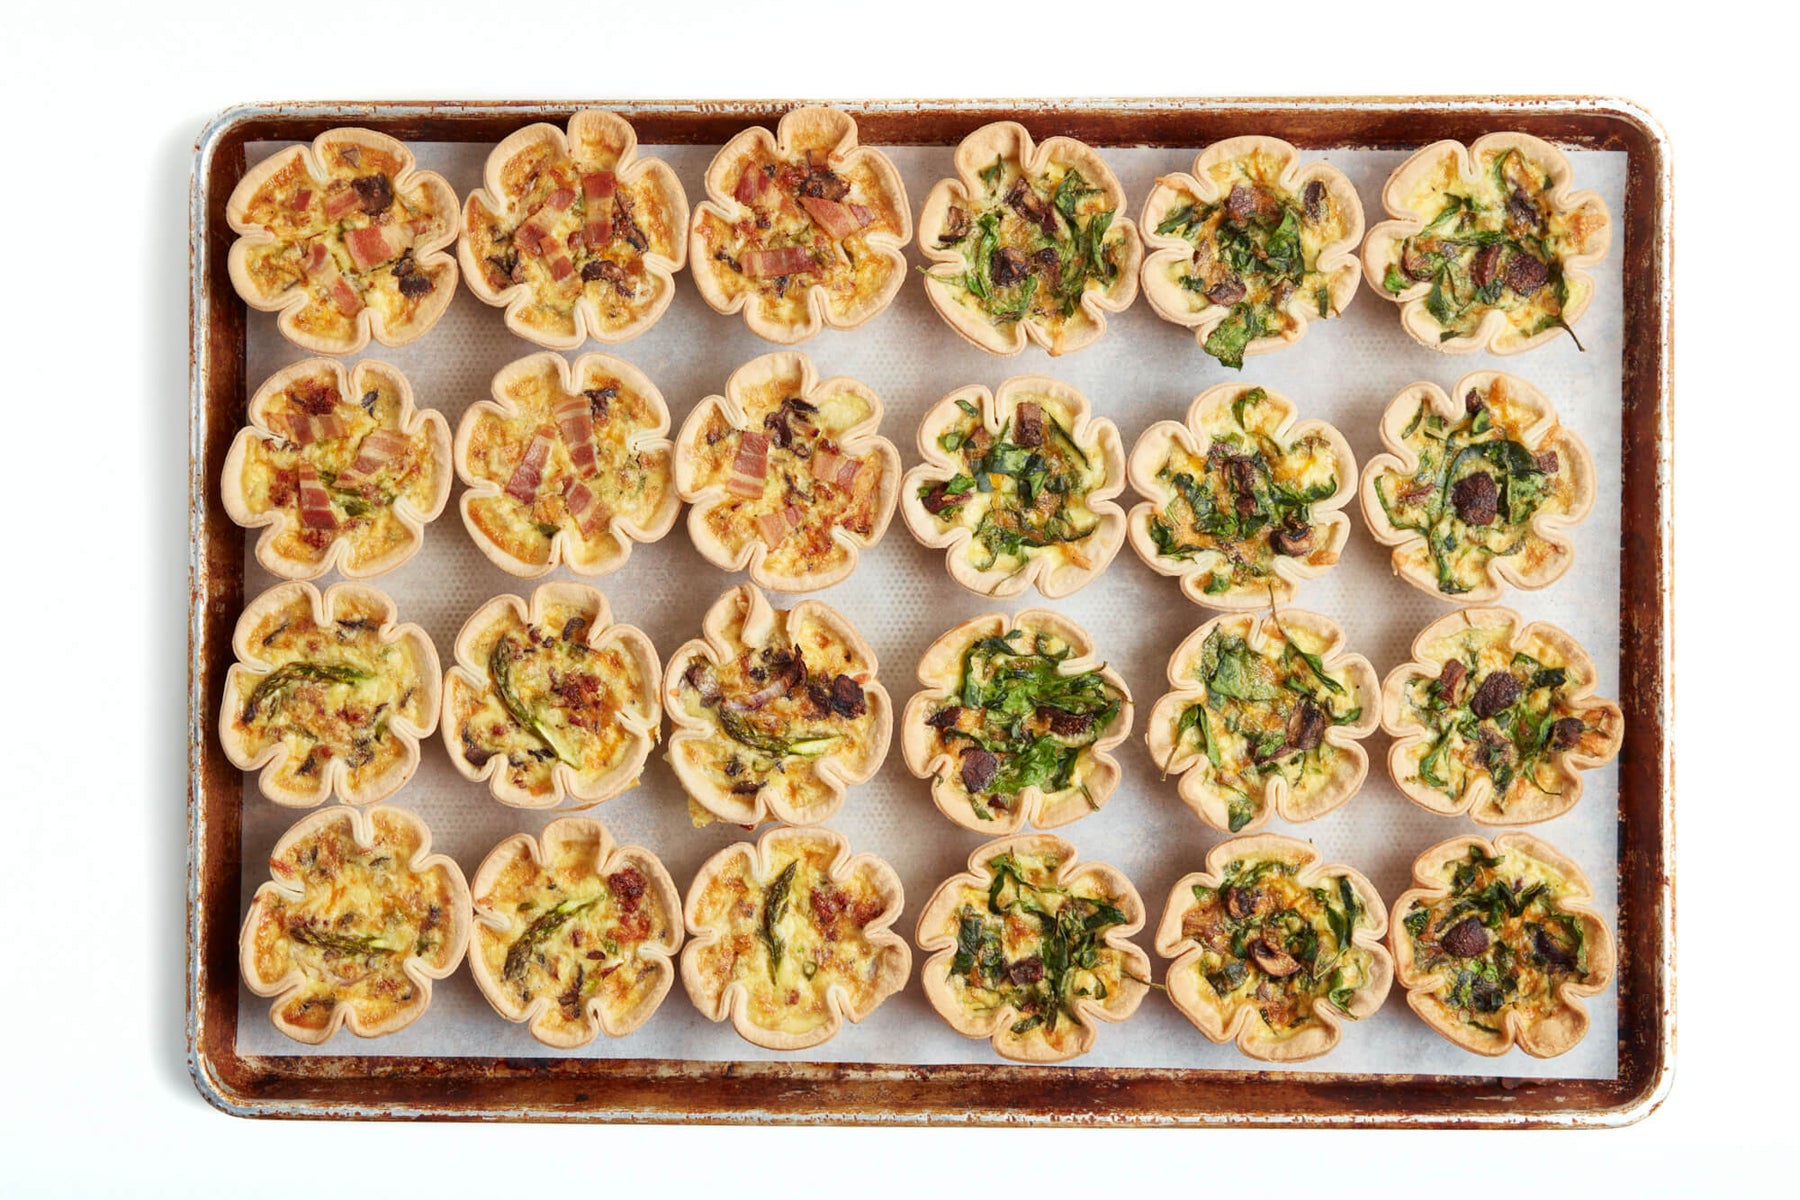 Starter Bakery tray of individually baked quiches